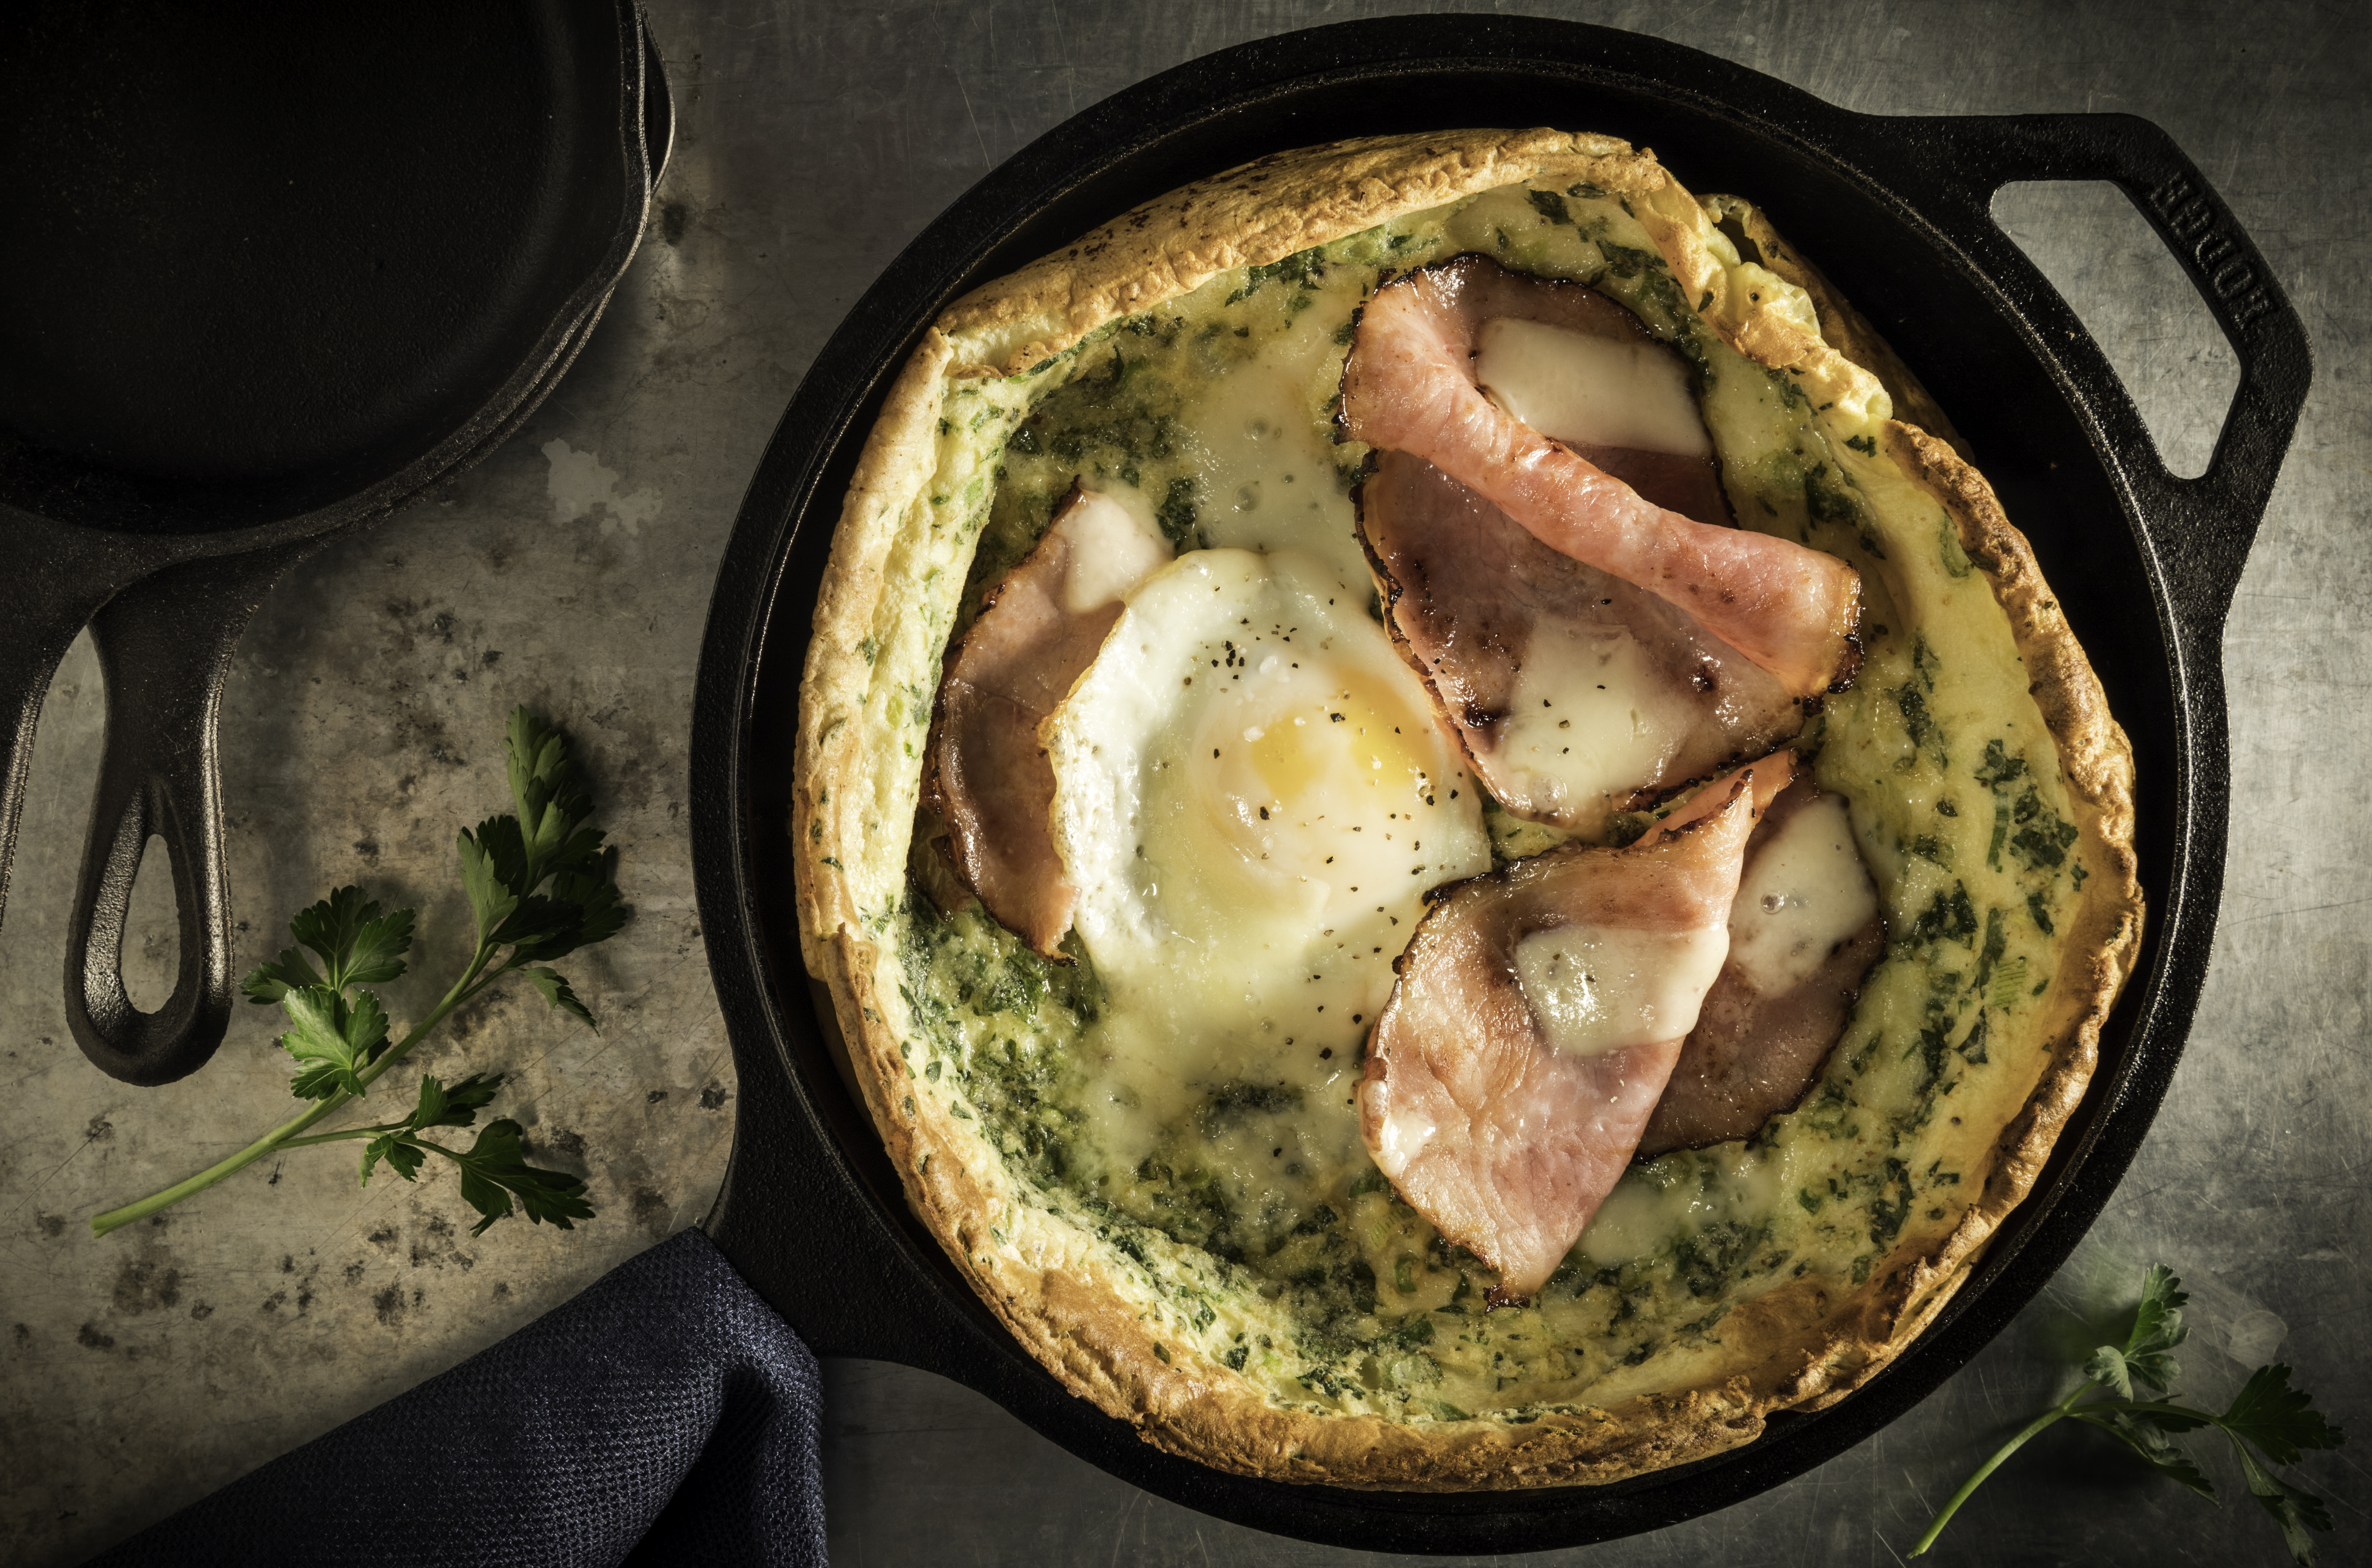 These savory Dutch pancakes puff up golden and eggy just like the traditional sweet Dutch babies; however, these are filled with all of your favorite savory flavors like fresh herbs, ham, eggs, and cheese.